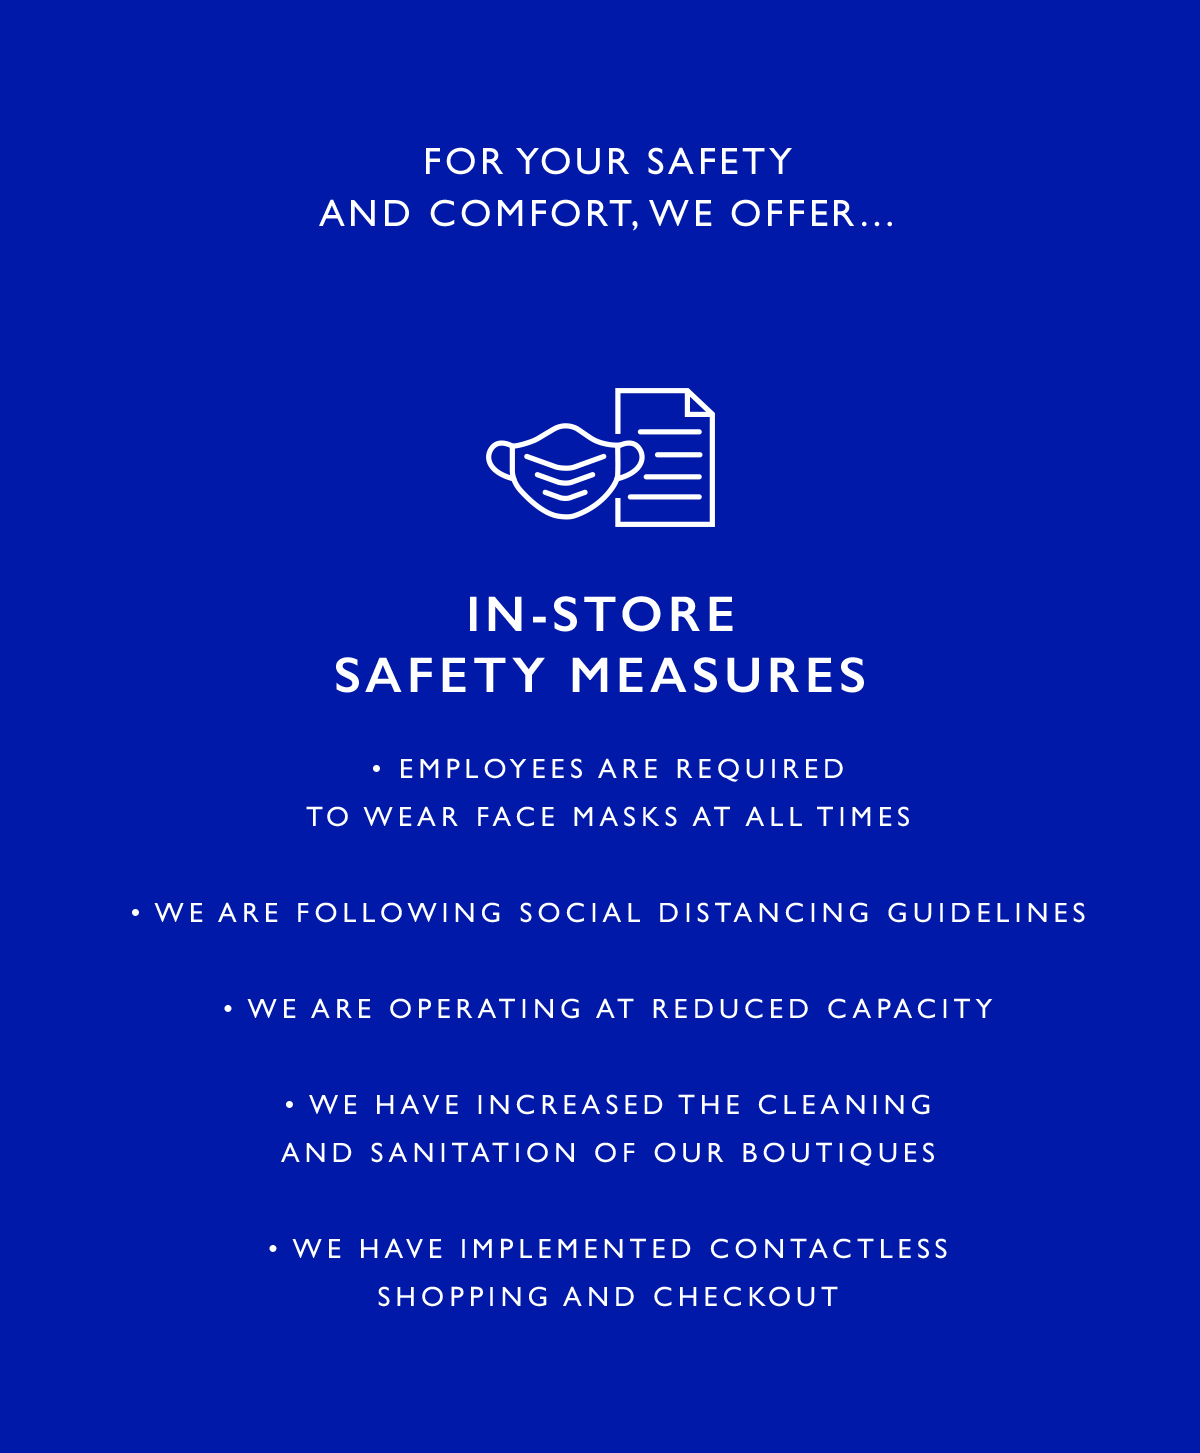 In-Store Safety Measures
											·         We ask that employees and customers wear face masks and gloves at all times
											·         We are following social distancing guidelines
											·         We are operating at reduced capacity
											·         We have increased the cleaning and sanitation of our boutiques
											·         We have implemented contactless shopping and checkout 